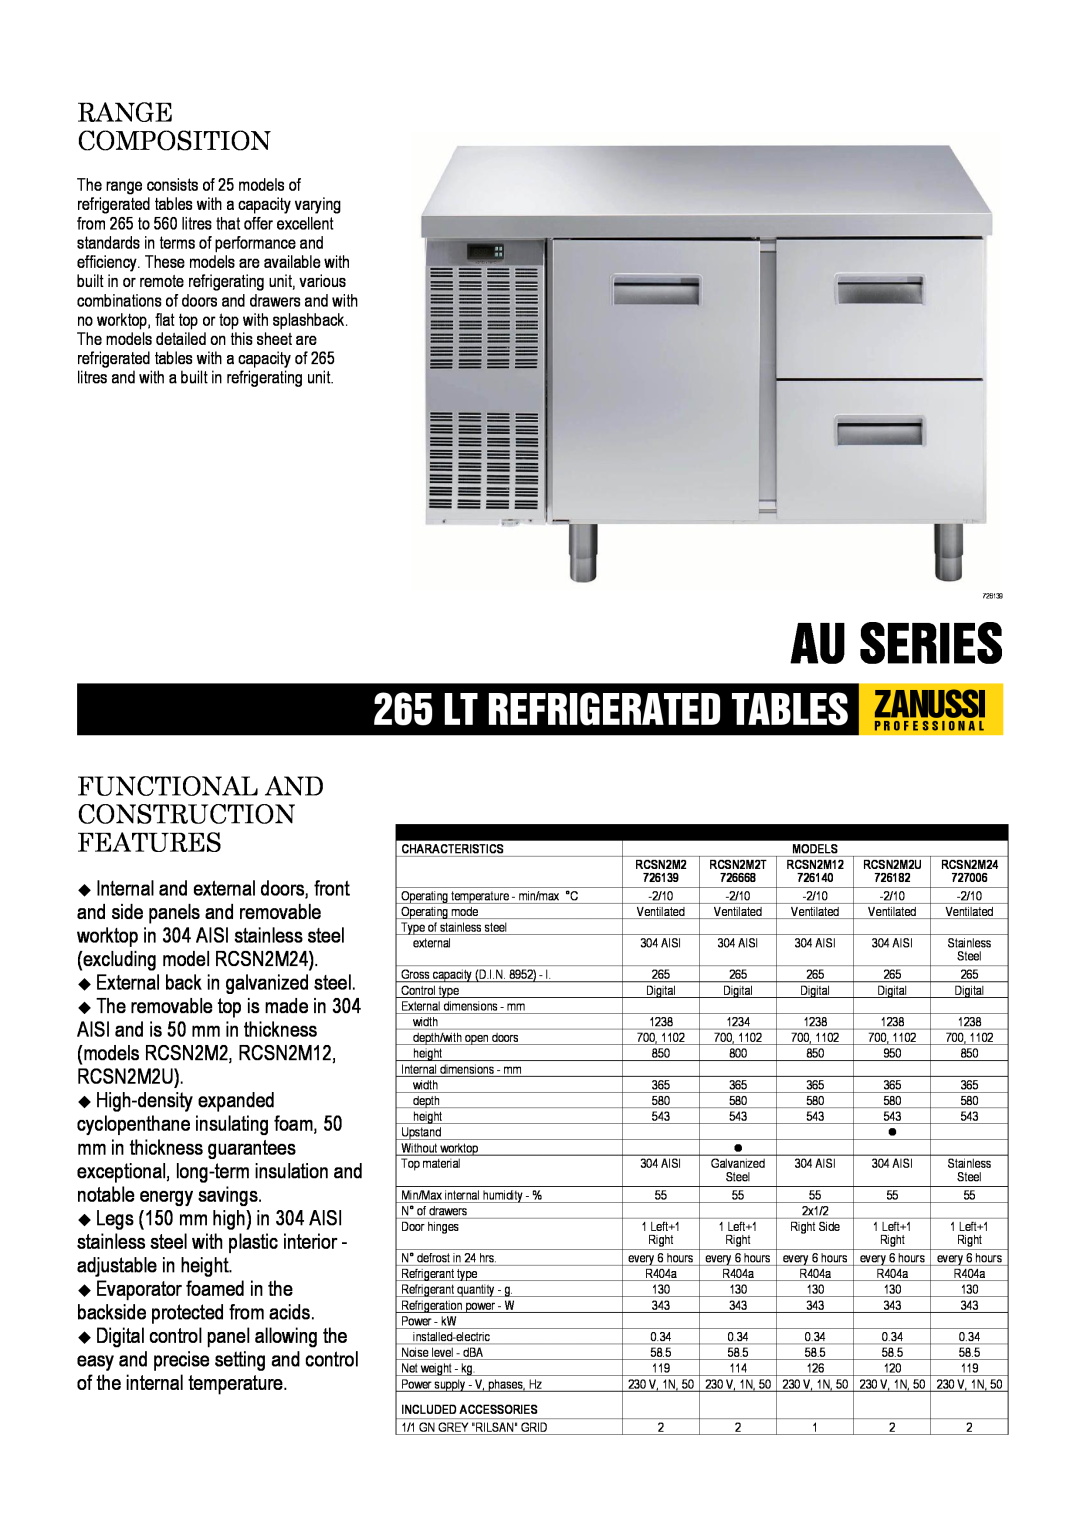 Zanussi 726182, 726668, 726140, 726139, 727006 dimensions Au Series, Range Composition, Functional And Construction Features 